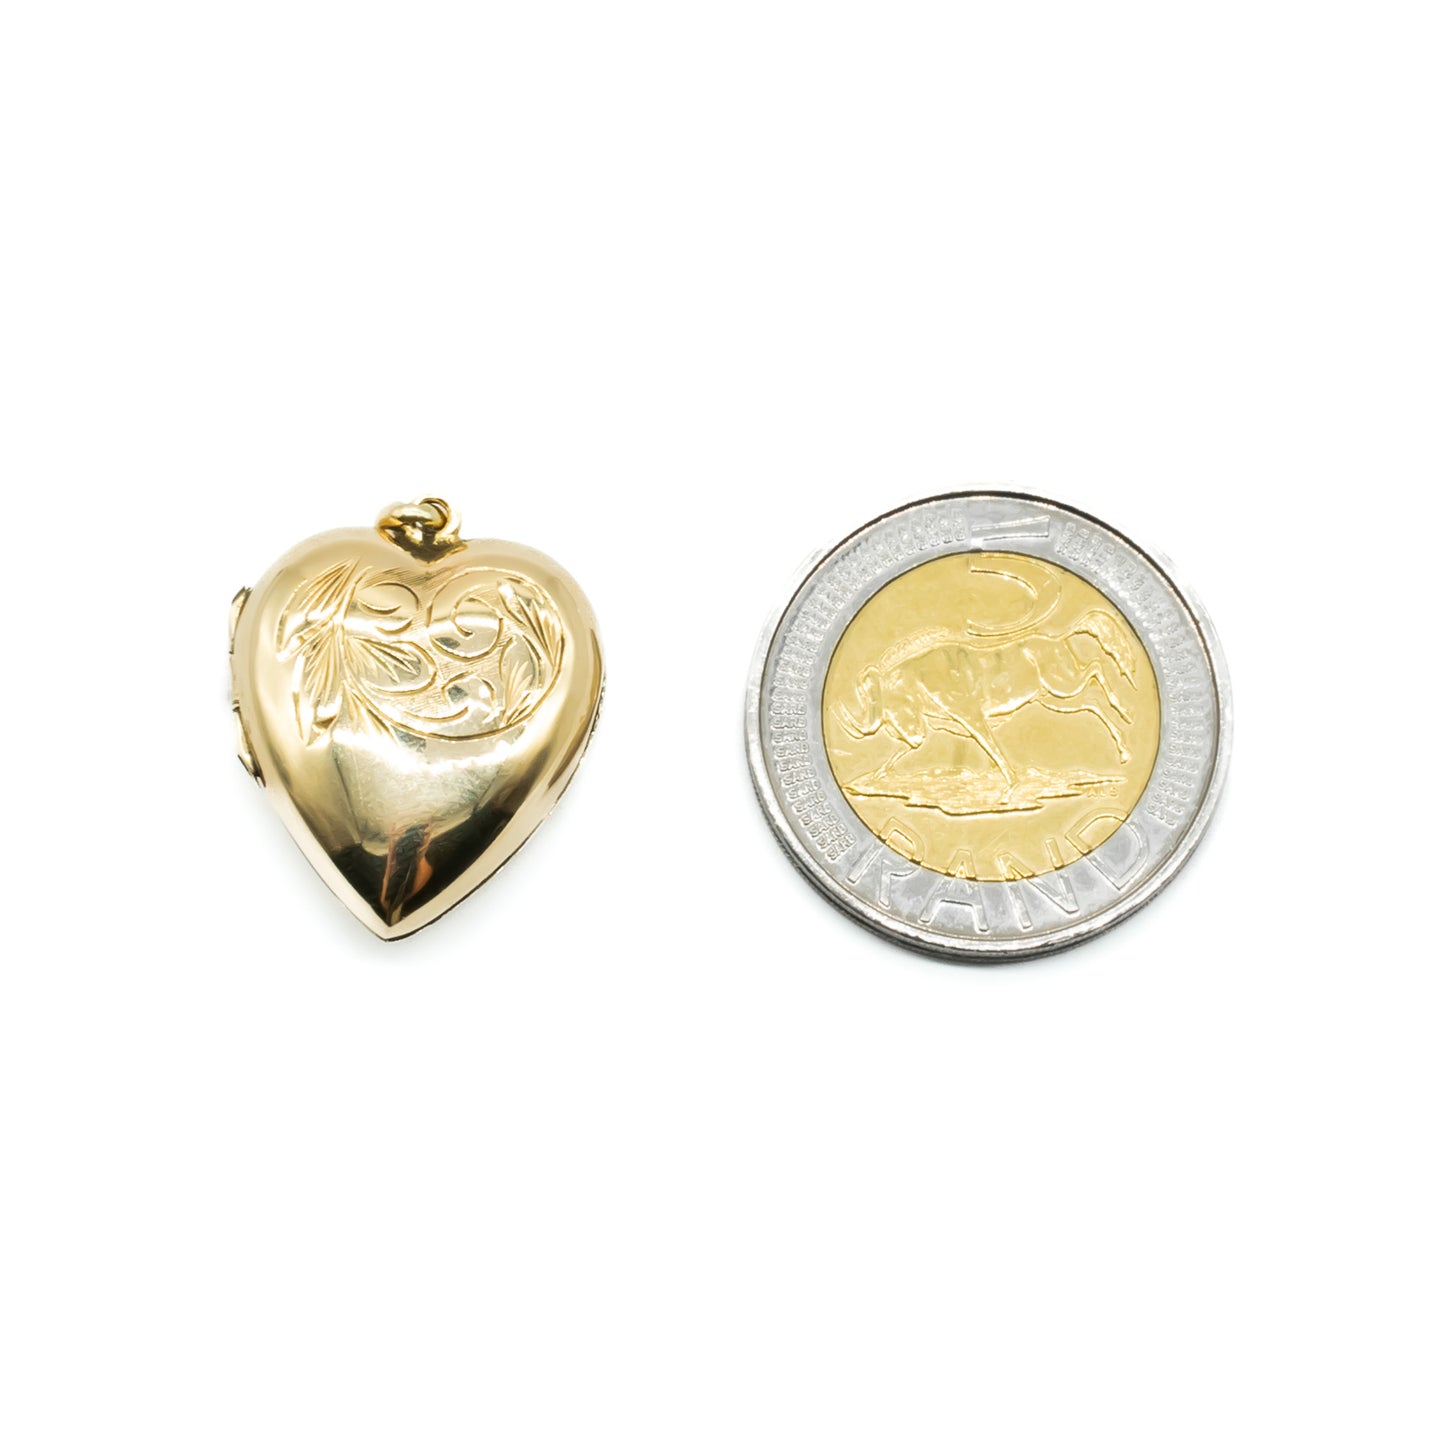 Lovely 9ct gold back and front beautifully engraved, heart shaped locket.